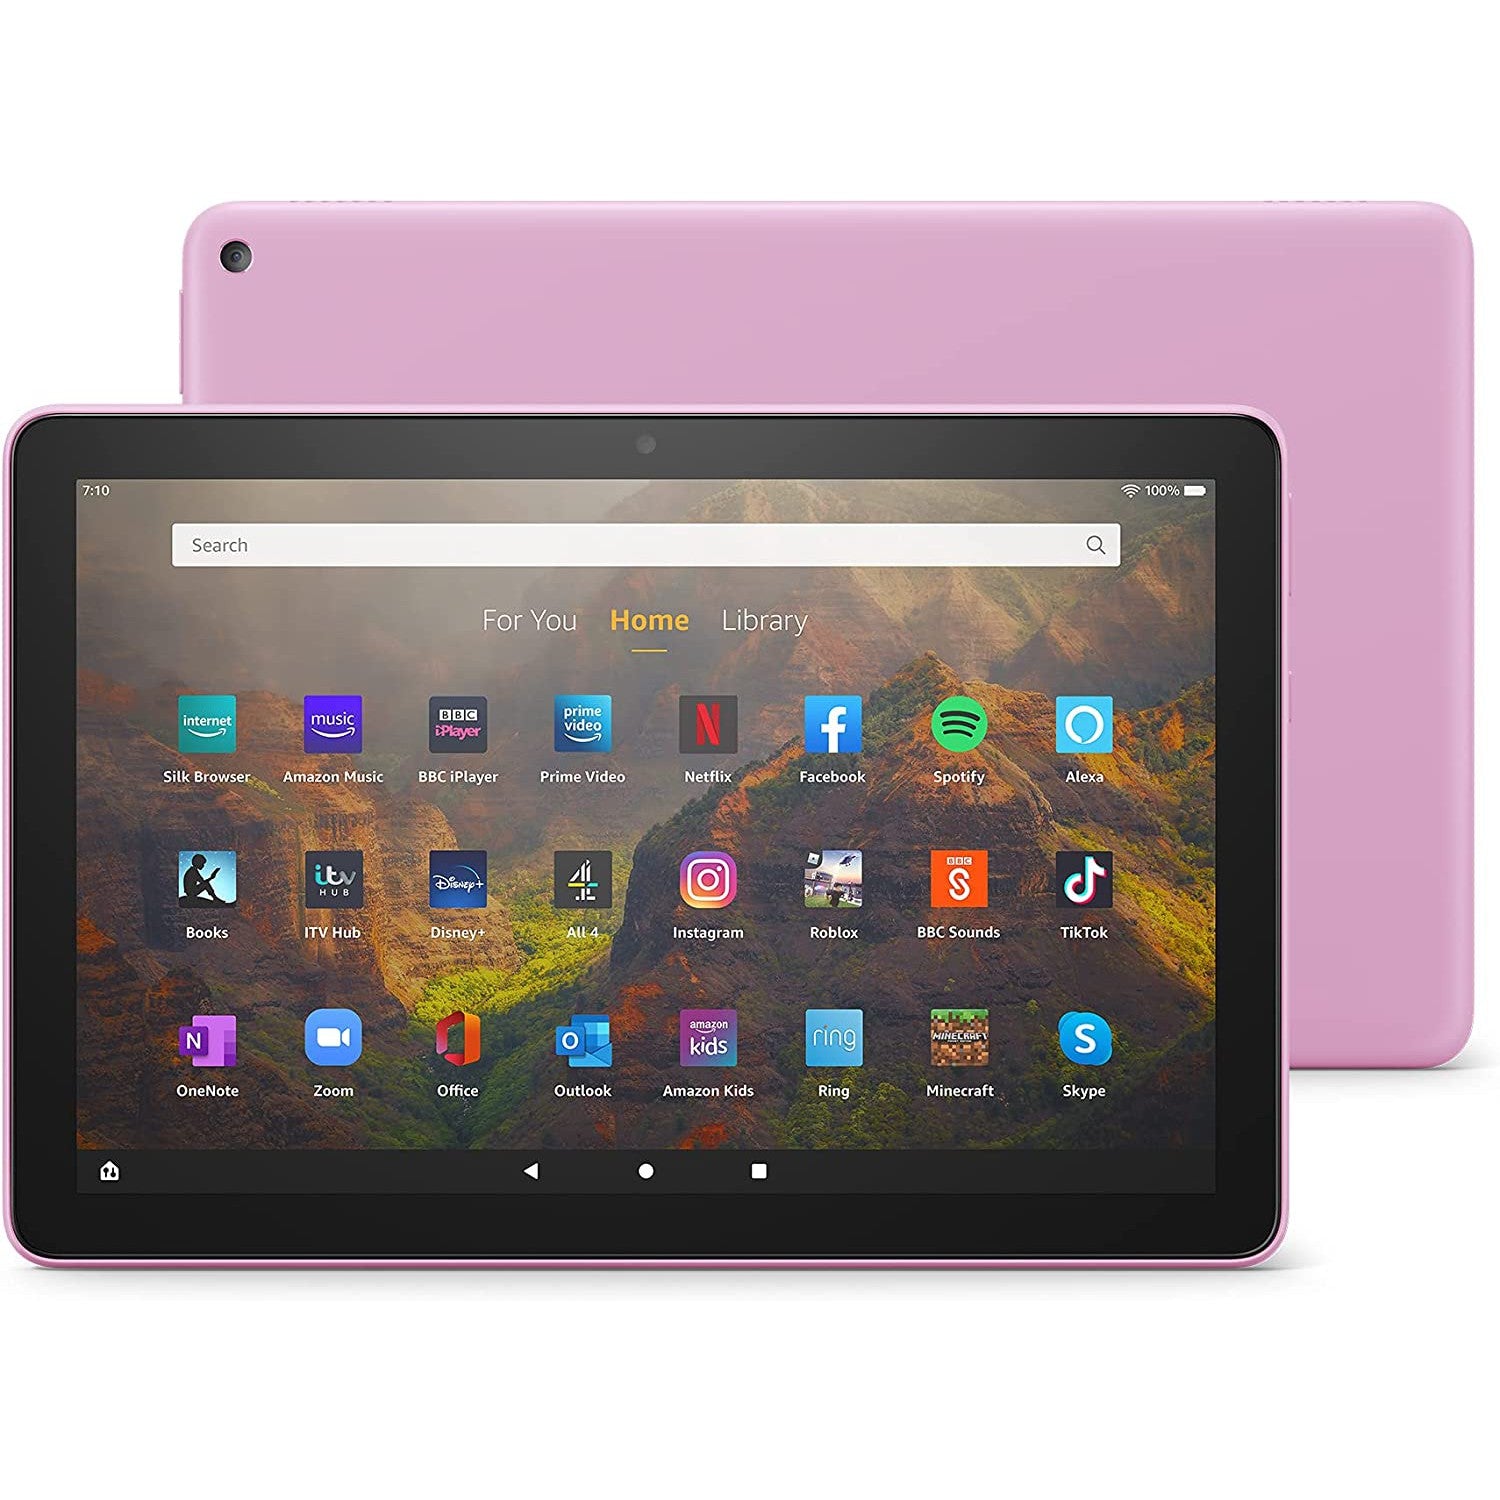 Amazon Fire HD 10 - M2V3R5 - 10.1", 32GB - Pink - Refurbished Excellent